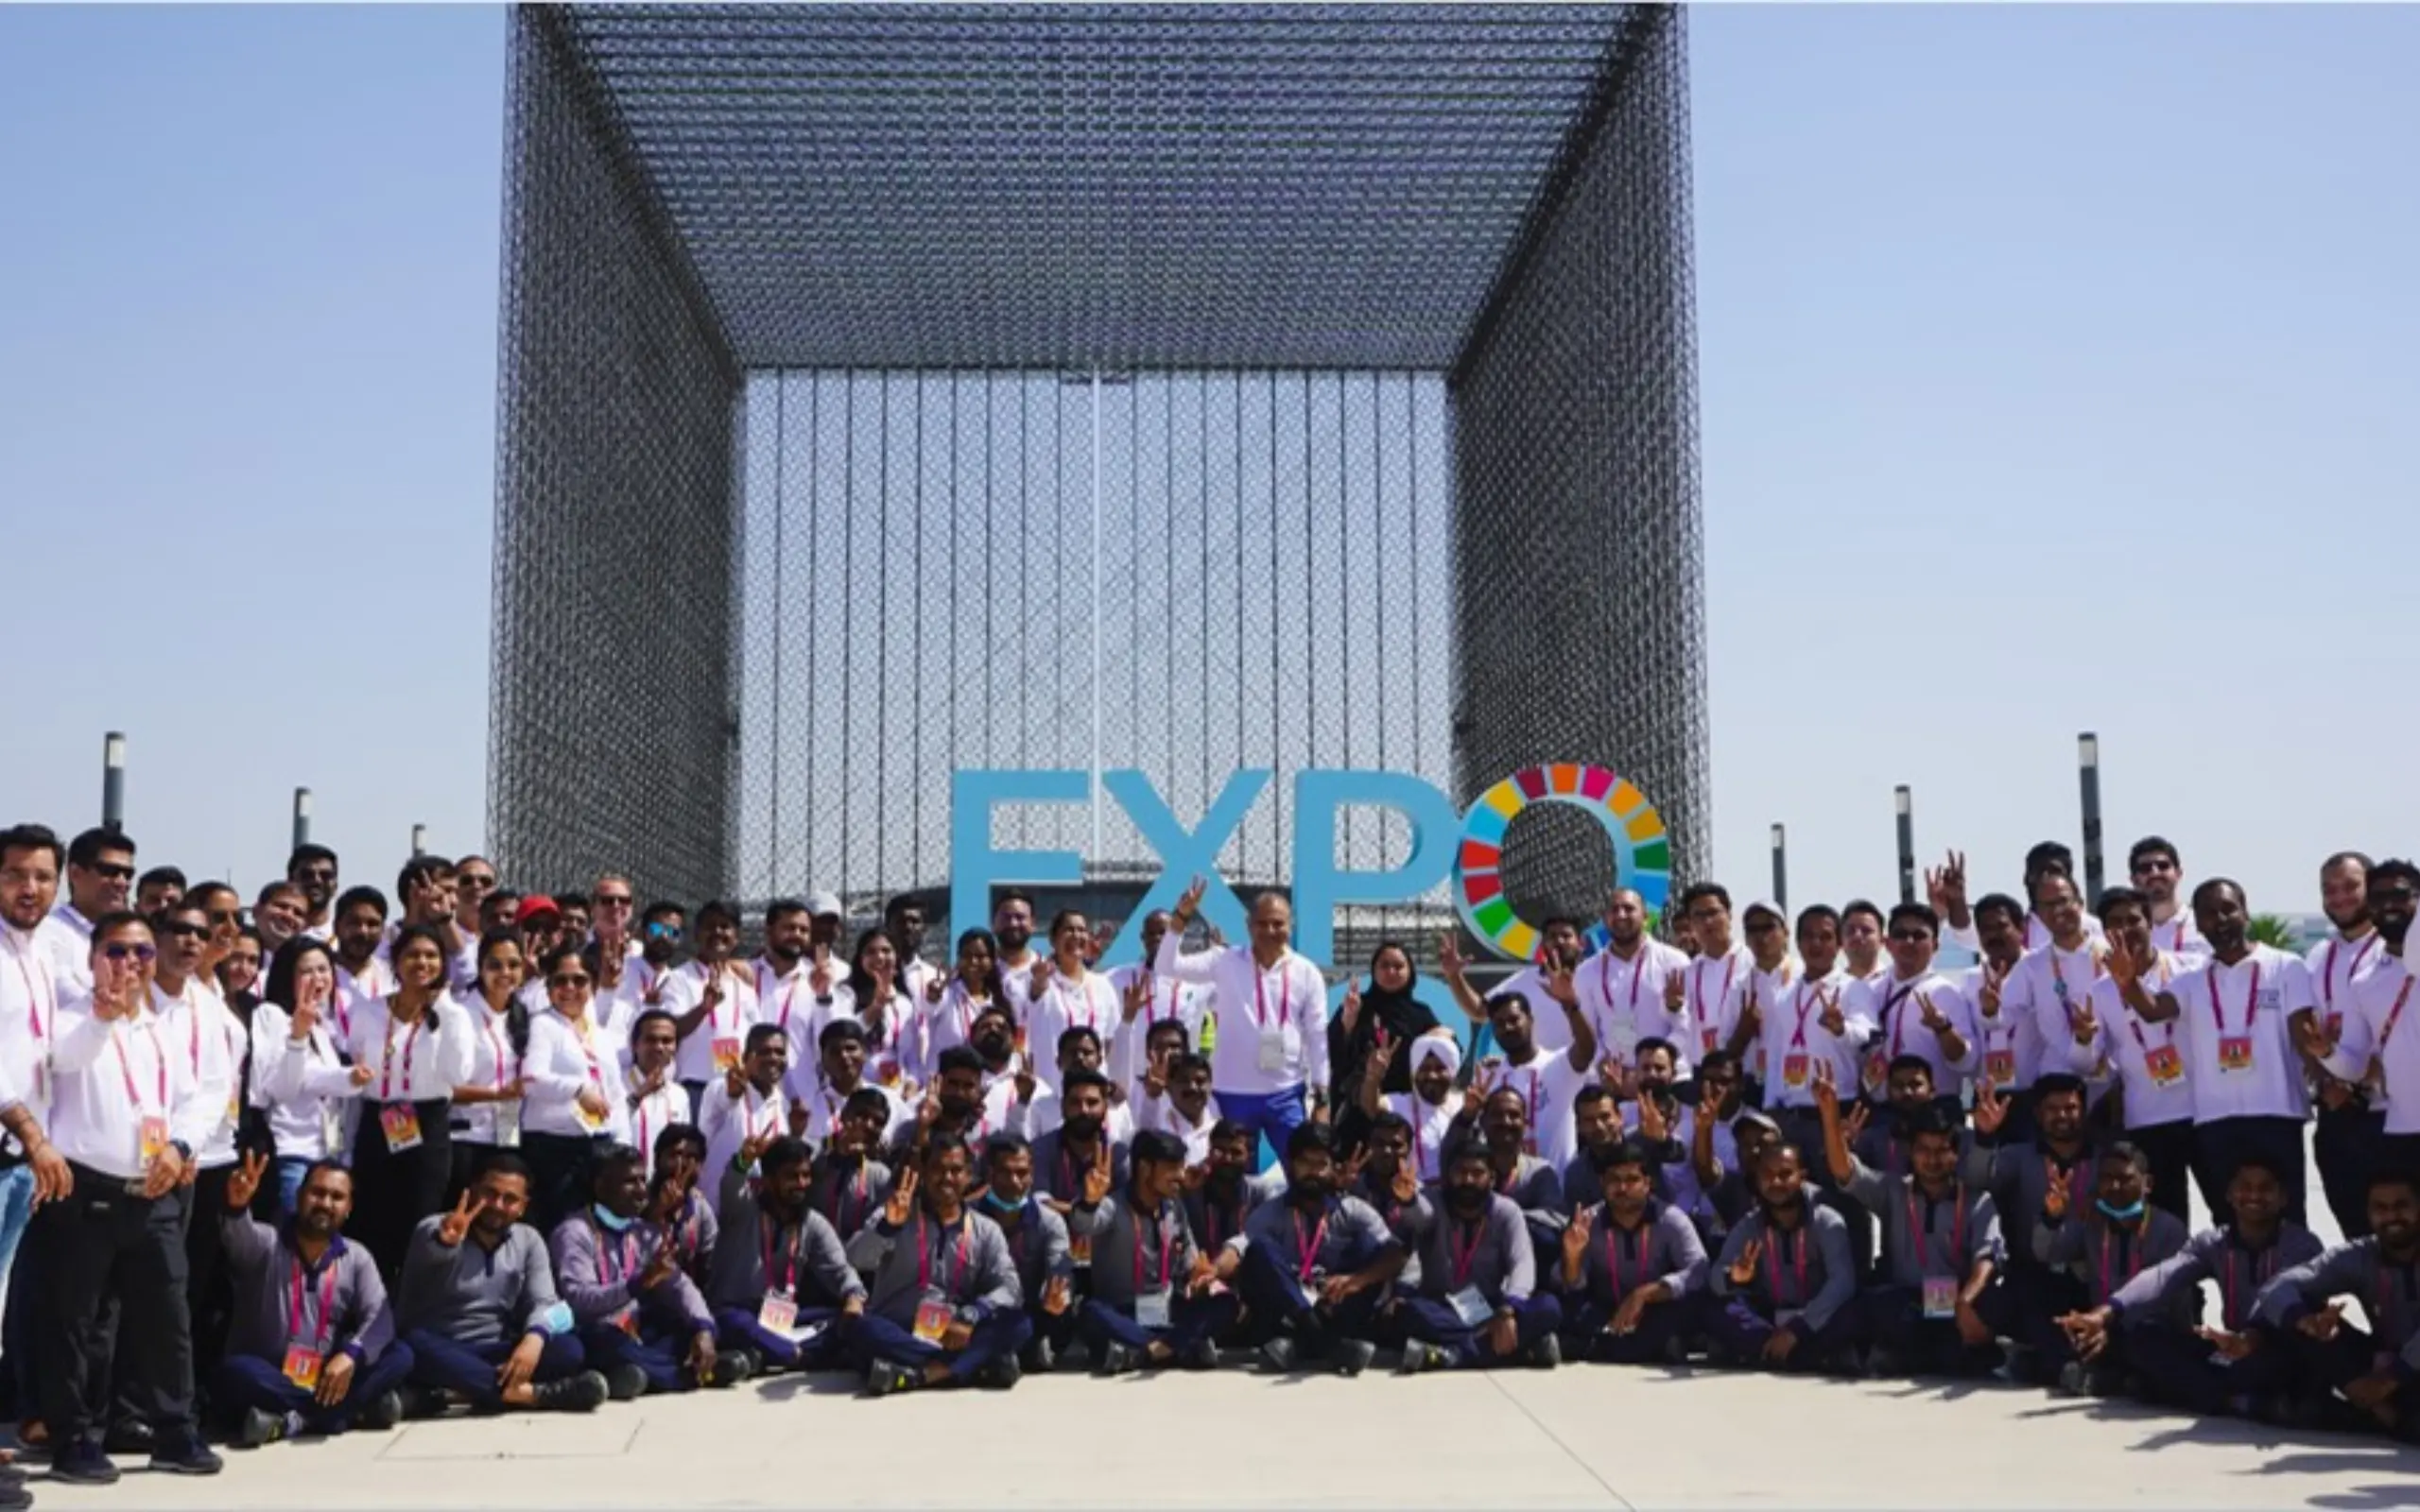 EFS-Group-concludes-a-successful-participation-at-the-Expo-2020-Dubai